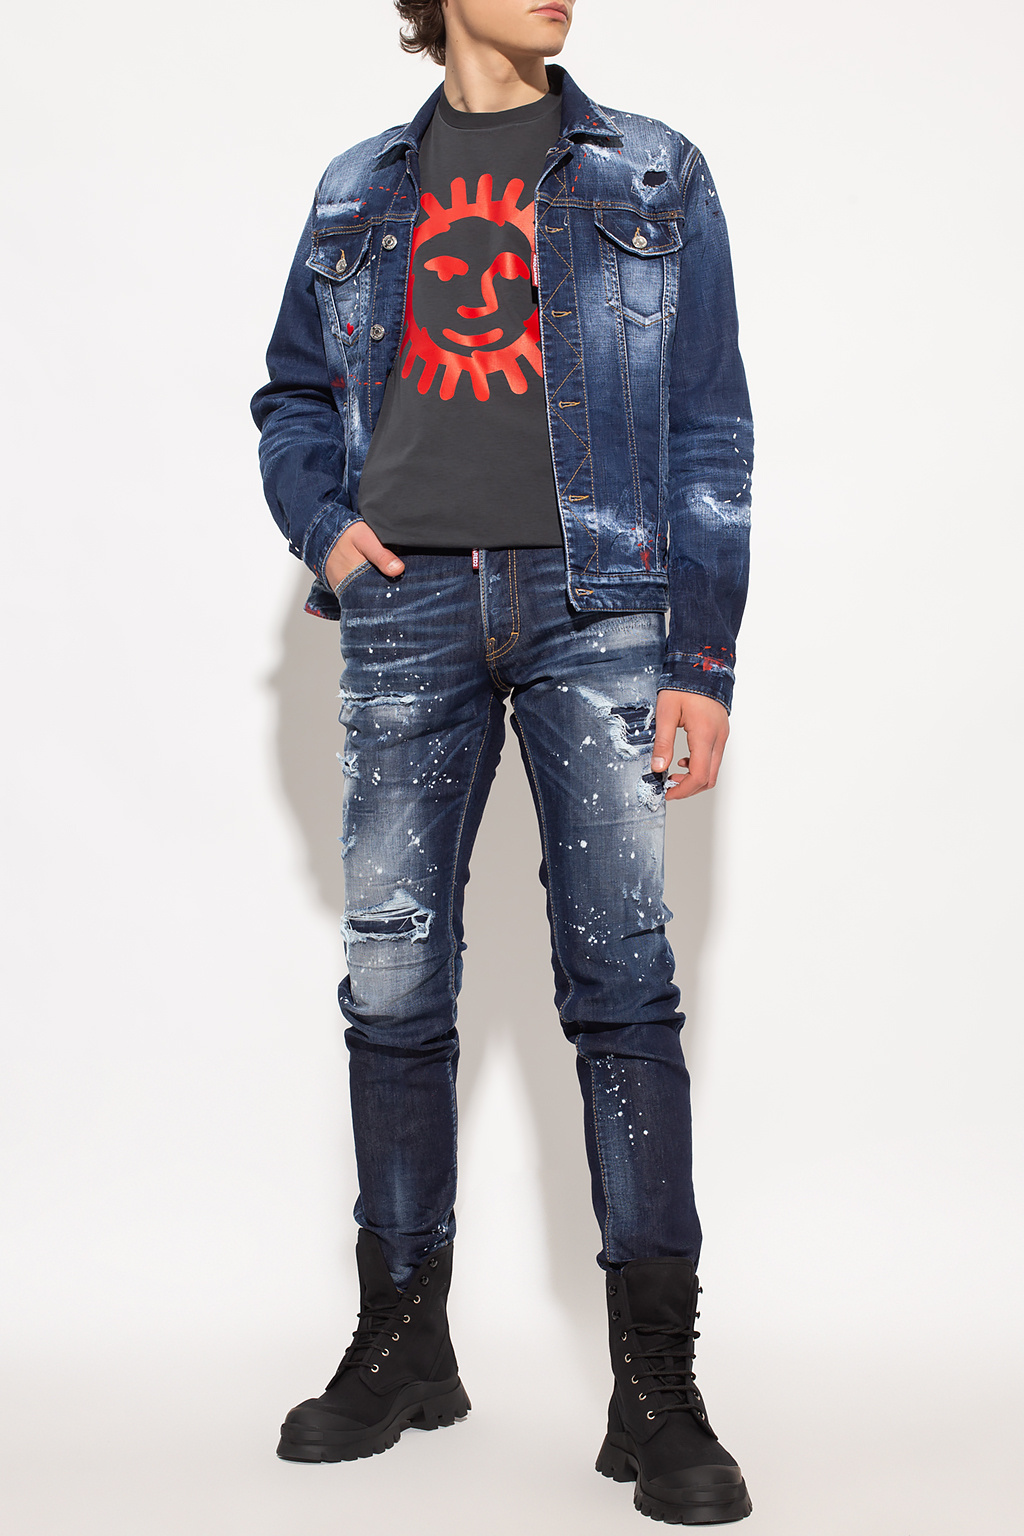 Dsquared2 ‘Cool Guy’ stonewashed jeans